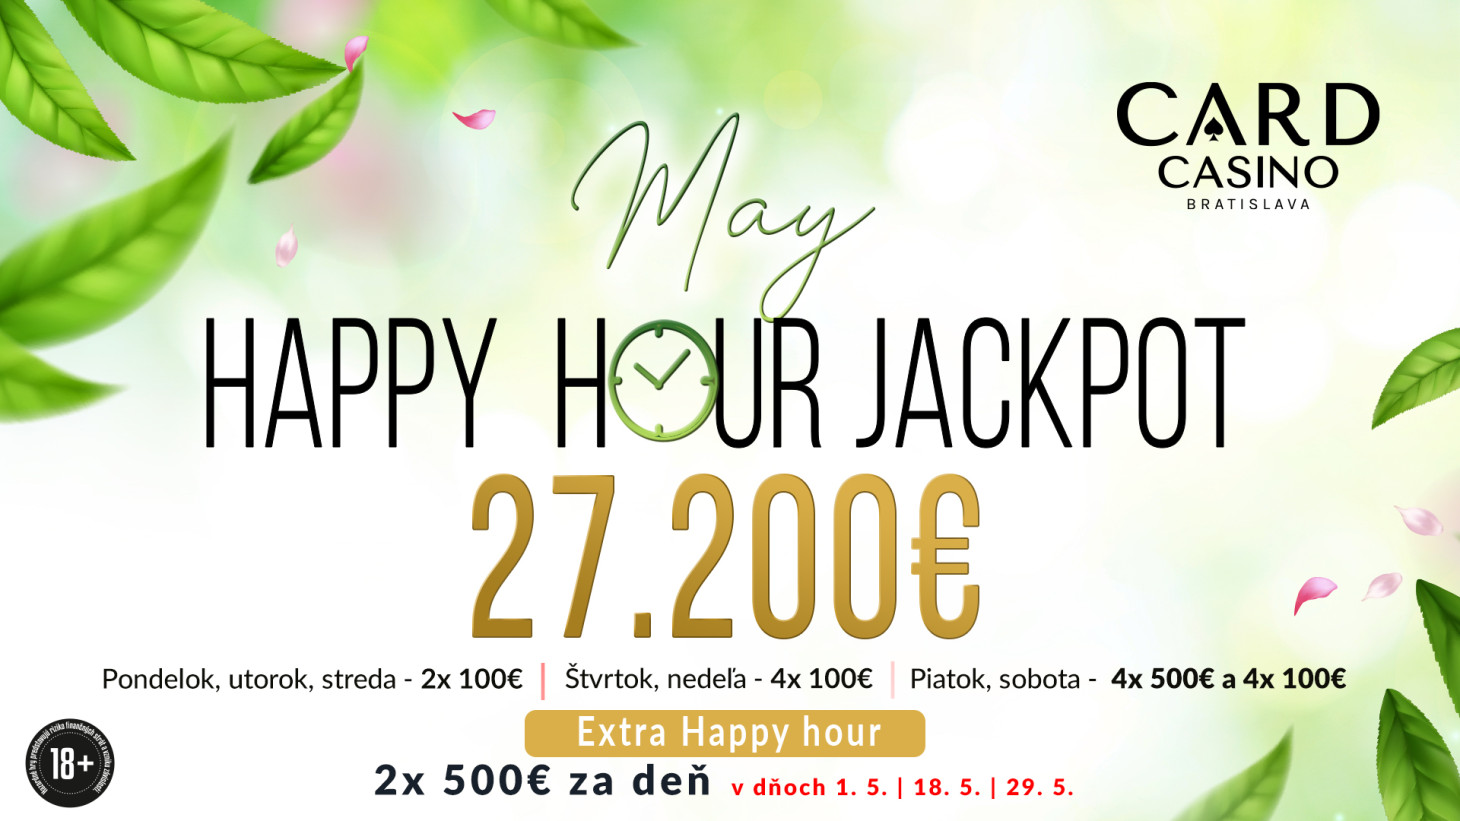 Great prizes throughout May! Redeem them with Happy Hour Jackpot